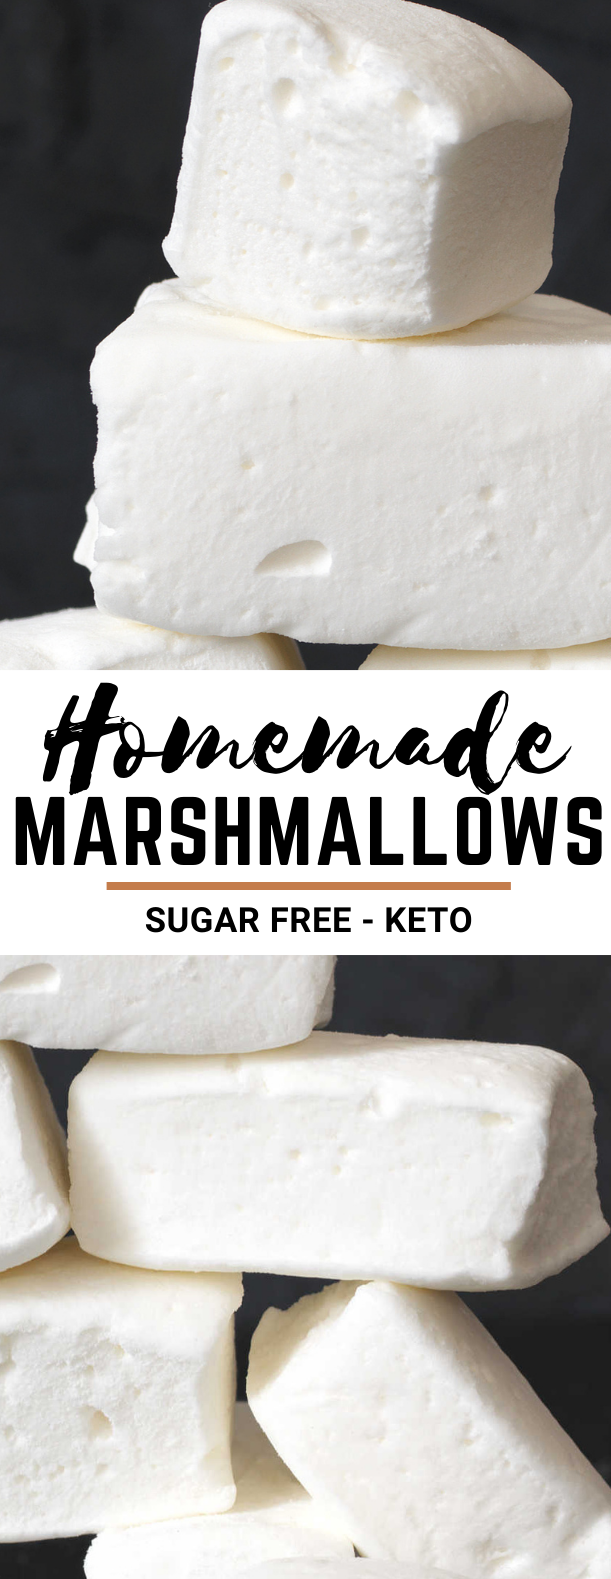 How to Make Sugar Free Marshmallows #healthy #ketofriendly #marshmallow #sweets #desserts